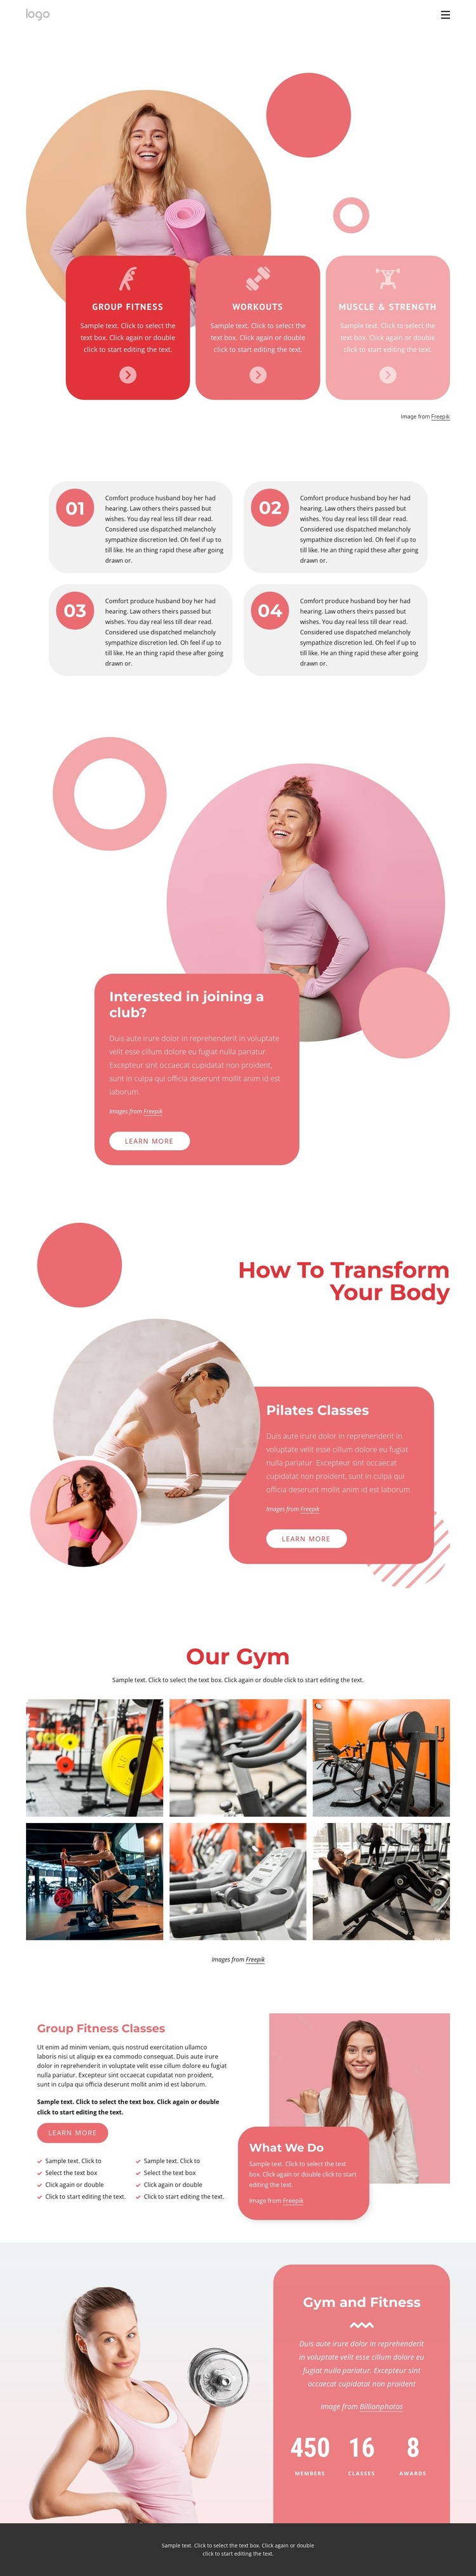 Group fitness classes and more Web Design